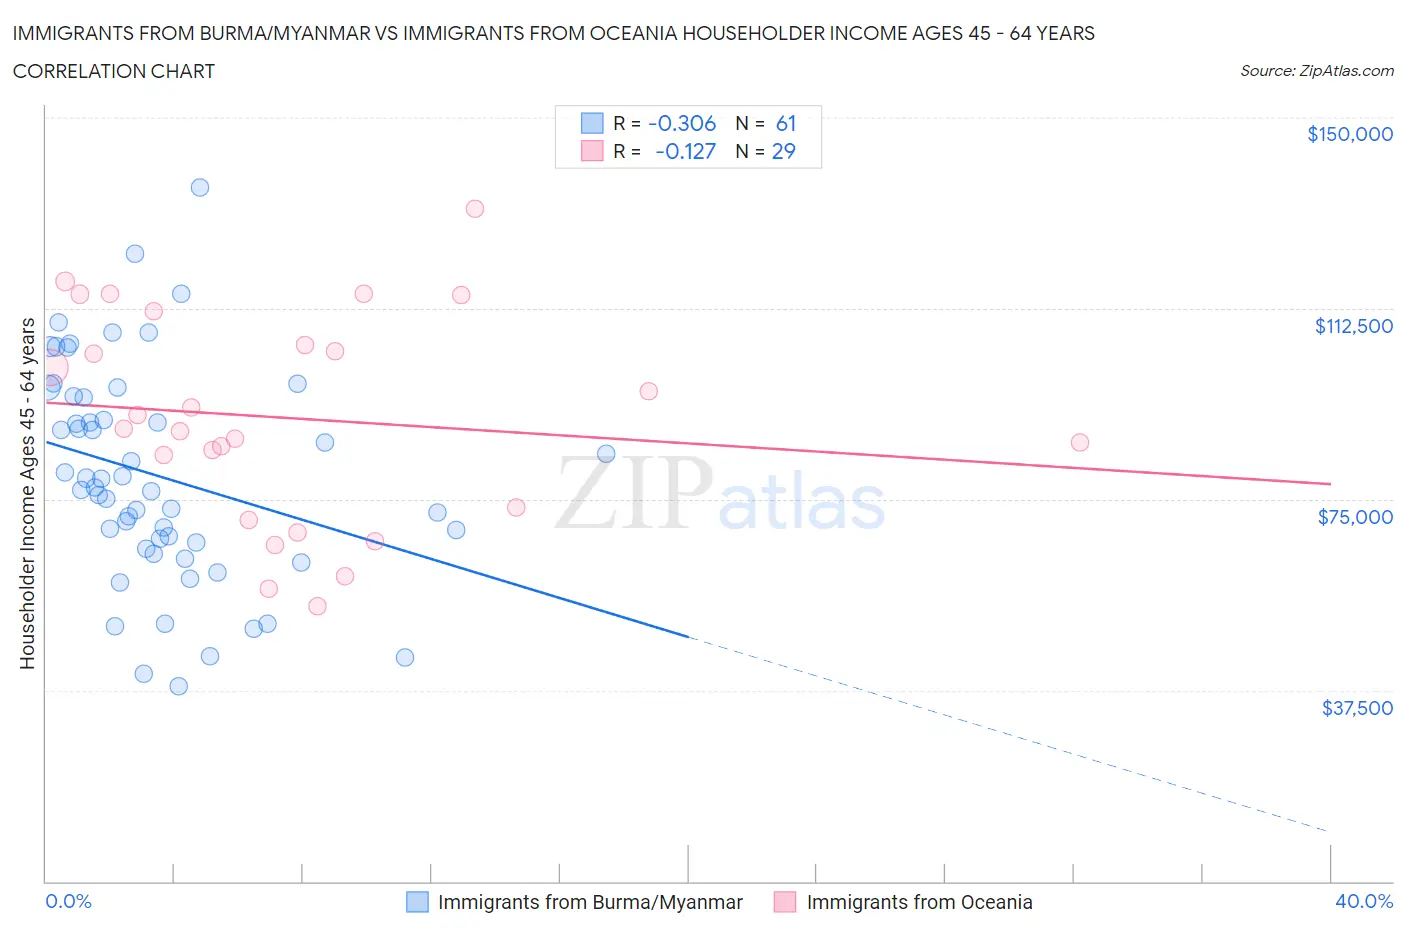 Immigrants from Burma/Myanmar vs Immigrants from Oceania Householder Income Ages 45 - 64 years